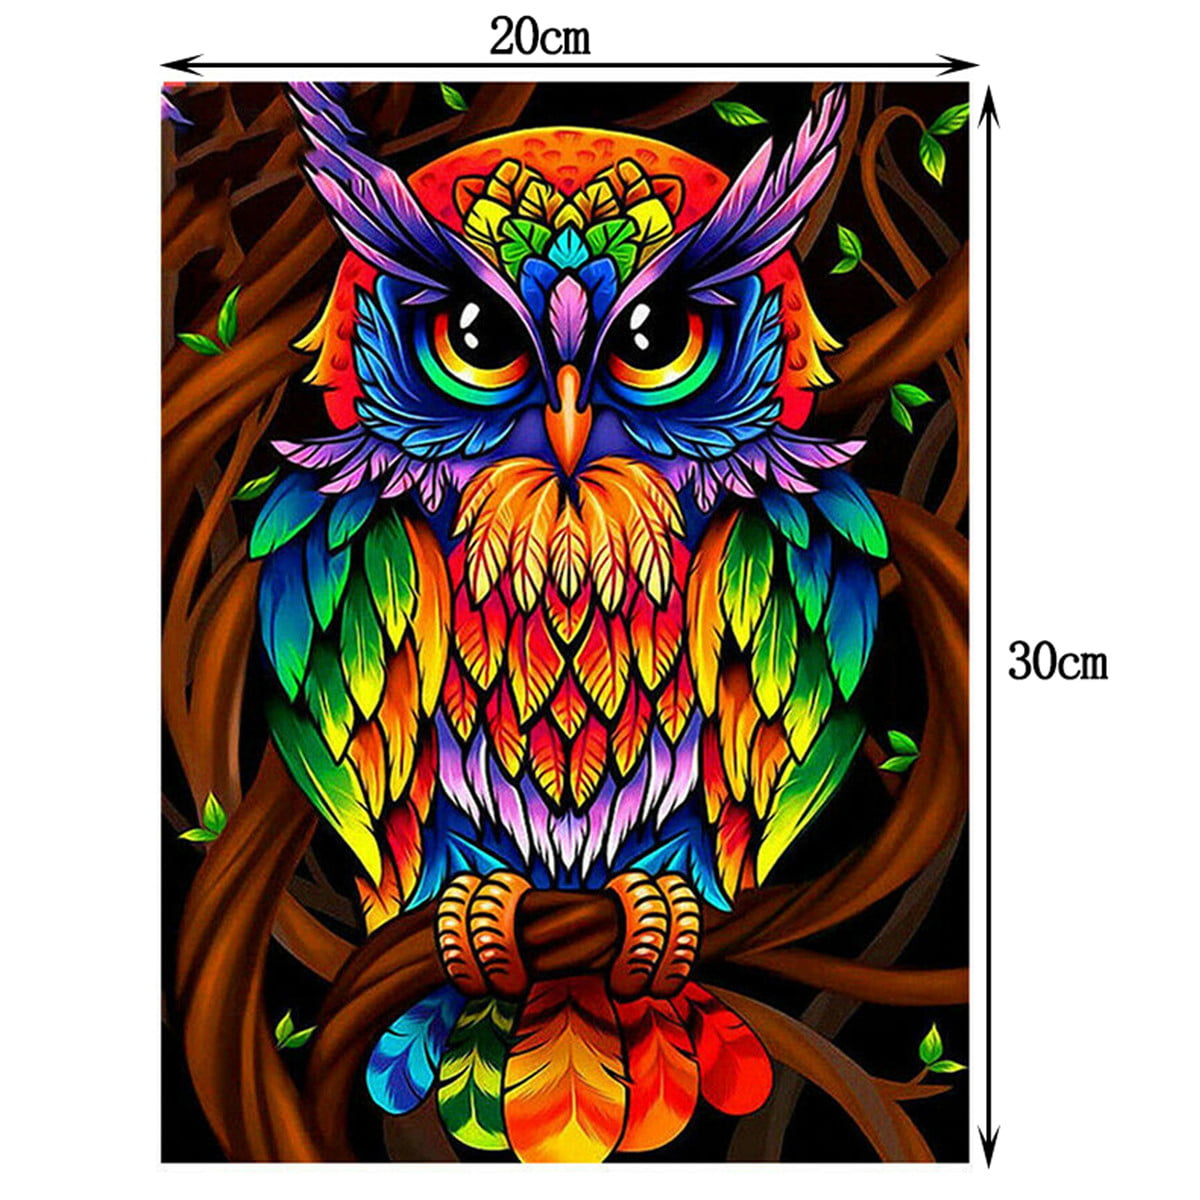 1pc 5d Full Drill Round Diamond Painting Kit For Adults (7.9x11.8 Inch),  Animal Themed Colorful Bird Diamond Art Kit For Wall Decor, Relaxation Gift